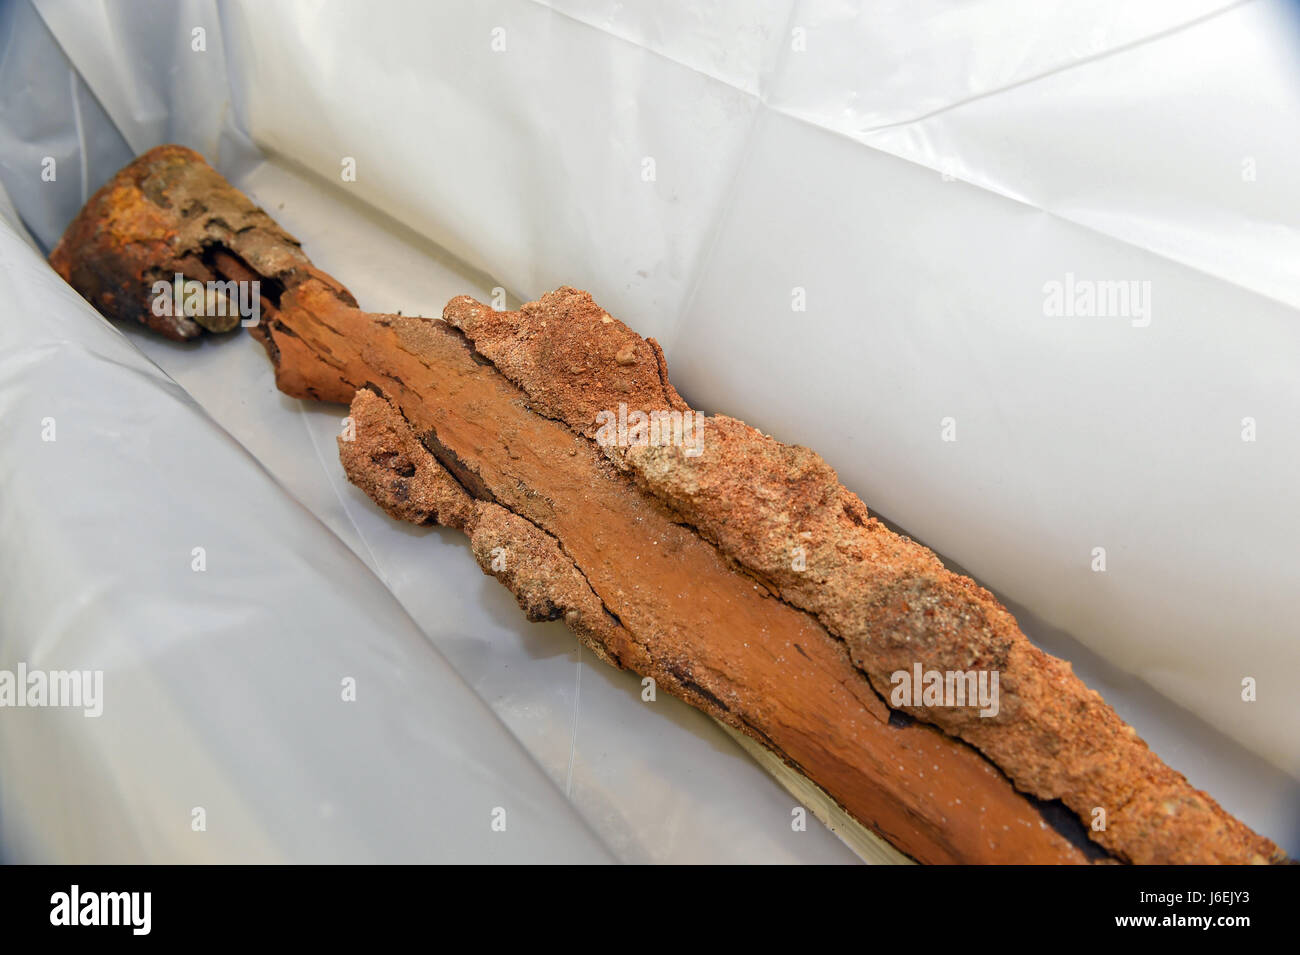 160817-N-PM781-003 WASHINGTON (Aug. 17, 2016) An M1 Garand rifle used by U.S. Marine Corps Raiders during the World War II attack on Japanese military forces on Makin Island is at Naval History and Heritage Command’s (NHHC) Underwater Archaeology Branch. Due to the rifle’s significant surface concretions, corrosion and other physical damage, NHHC Underwater Archaeology Branch is performing an assessment of the artifacts stability. (U.S. Navy photo by Arif Patani/Released) Stock Photo